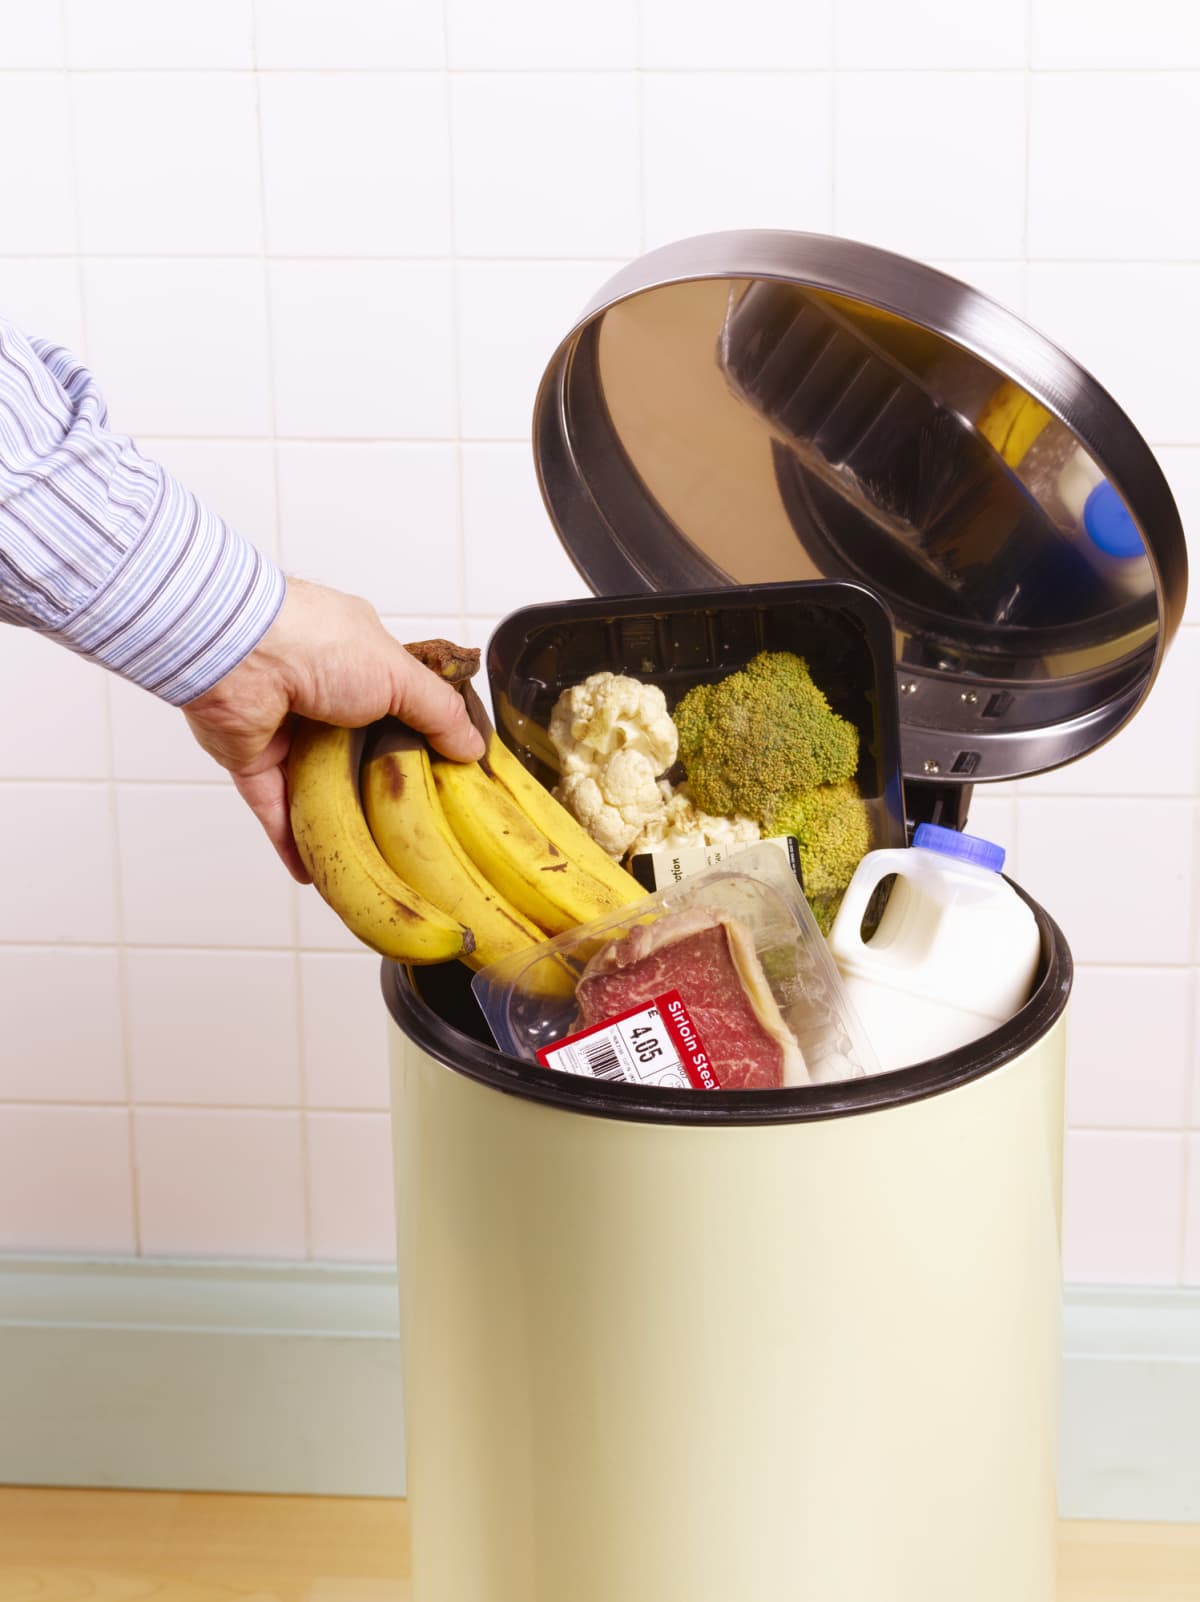 A hand throwing a bunch of bananas into a garbage can overflowing with food